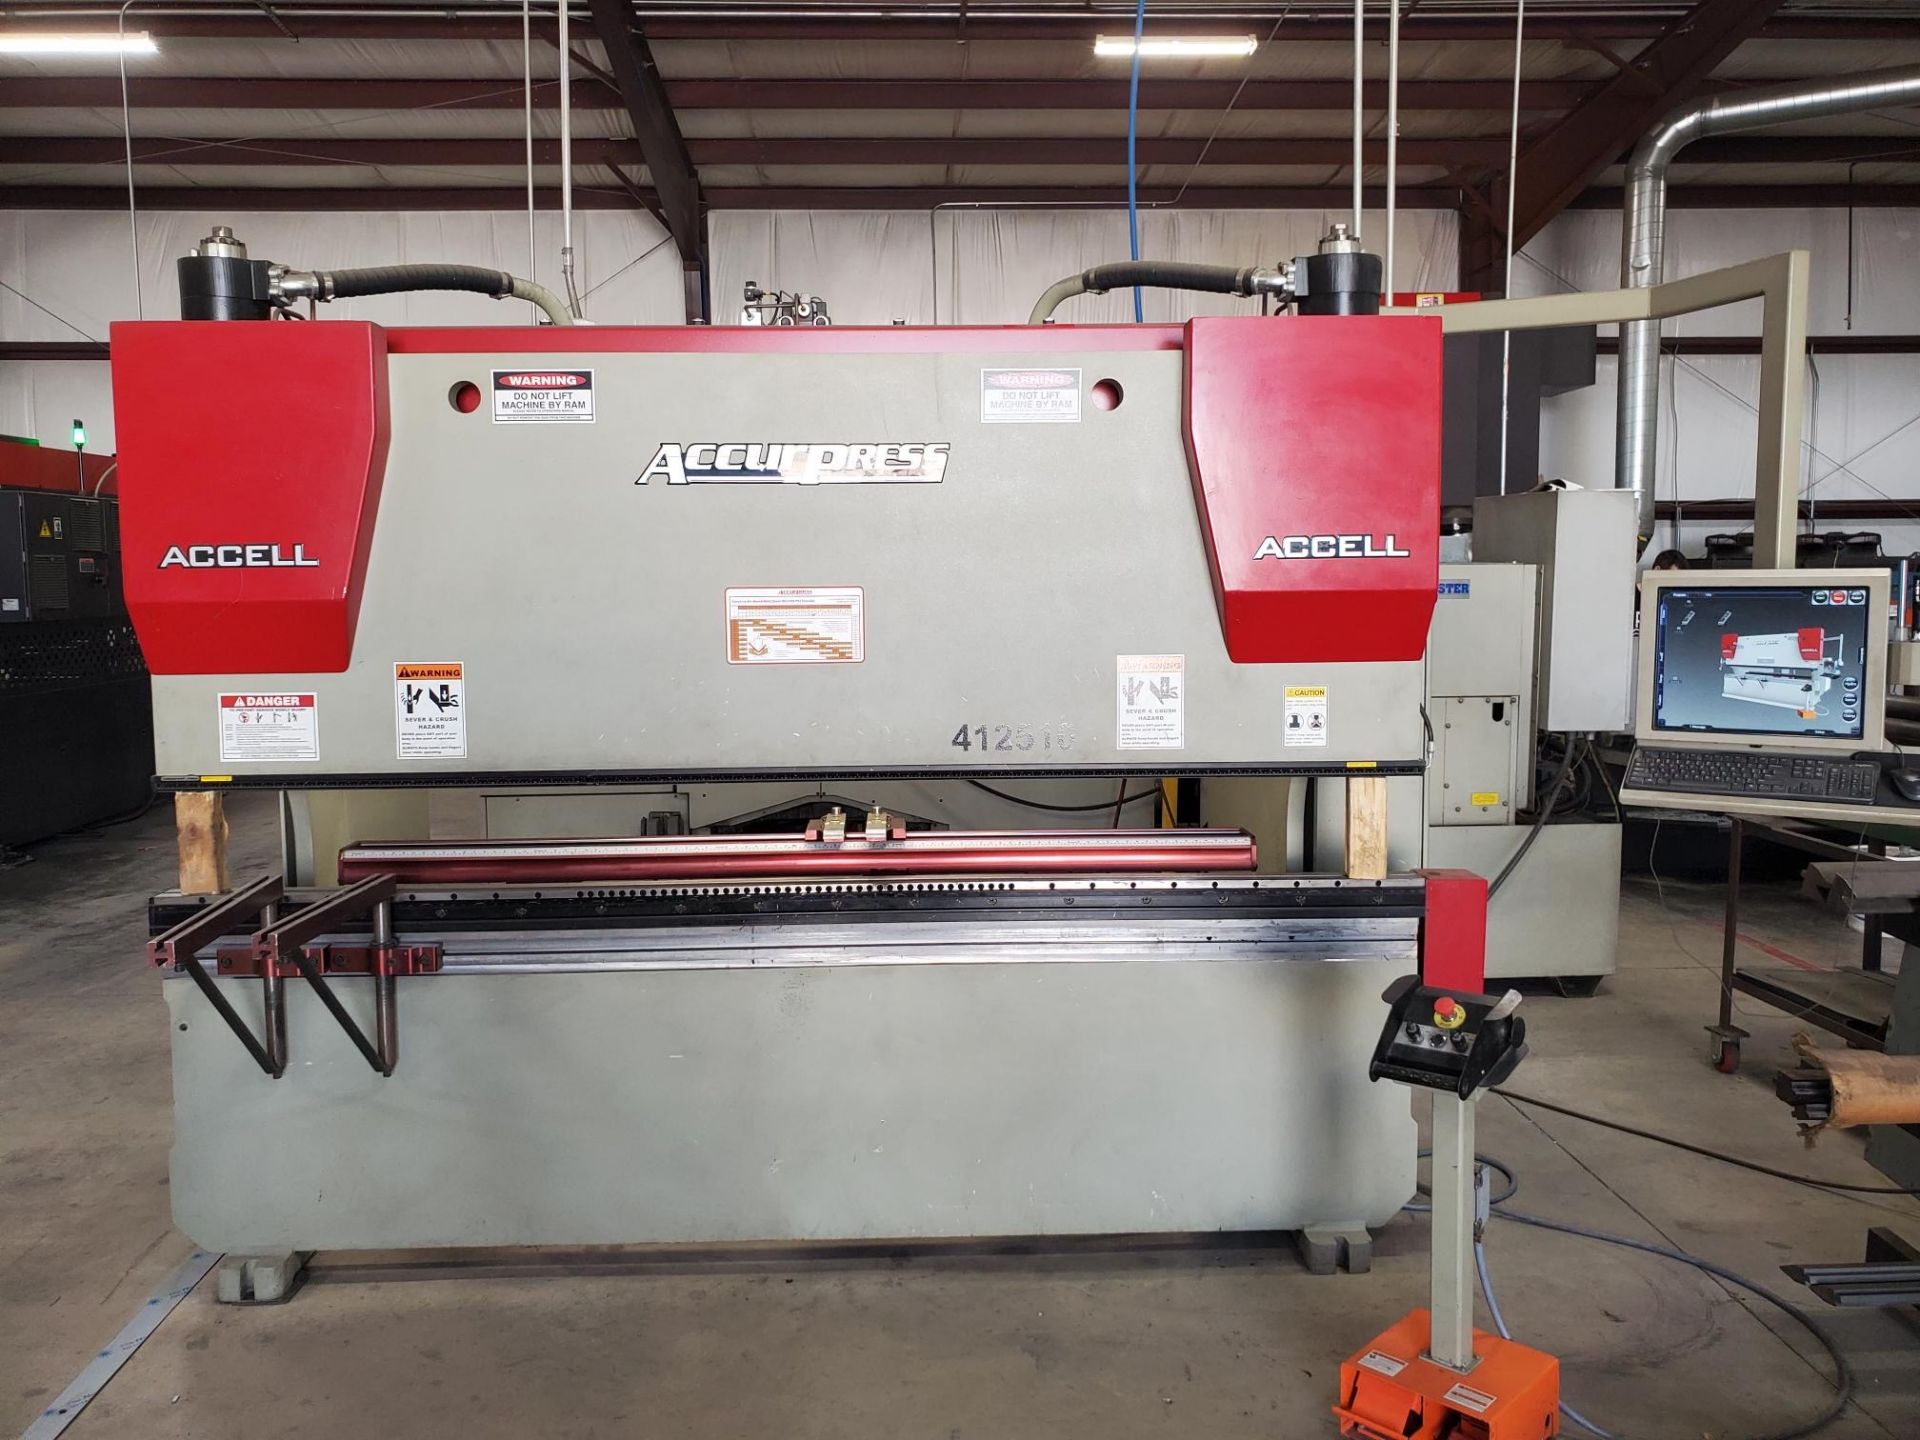 2019 Accurpess 412510 Press Brake, 125 Ton x 10' (Located in Rhome, TX) - Image 2 of 5